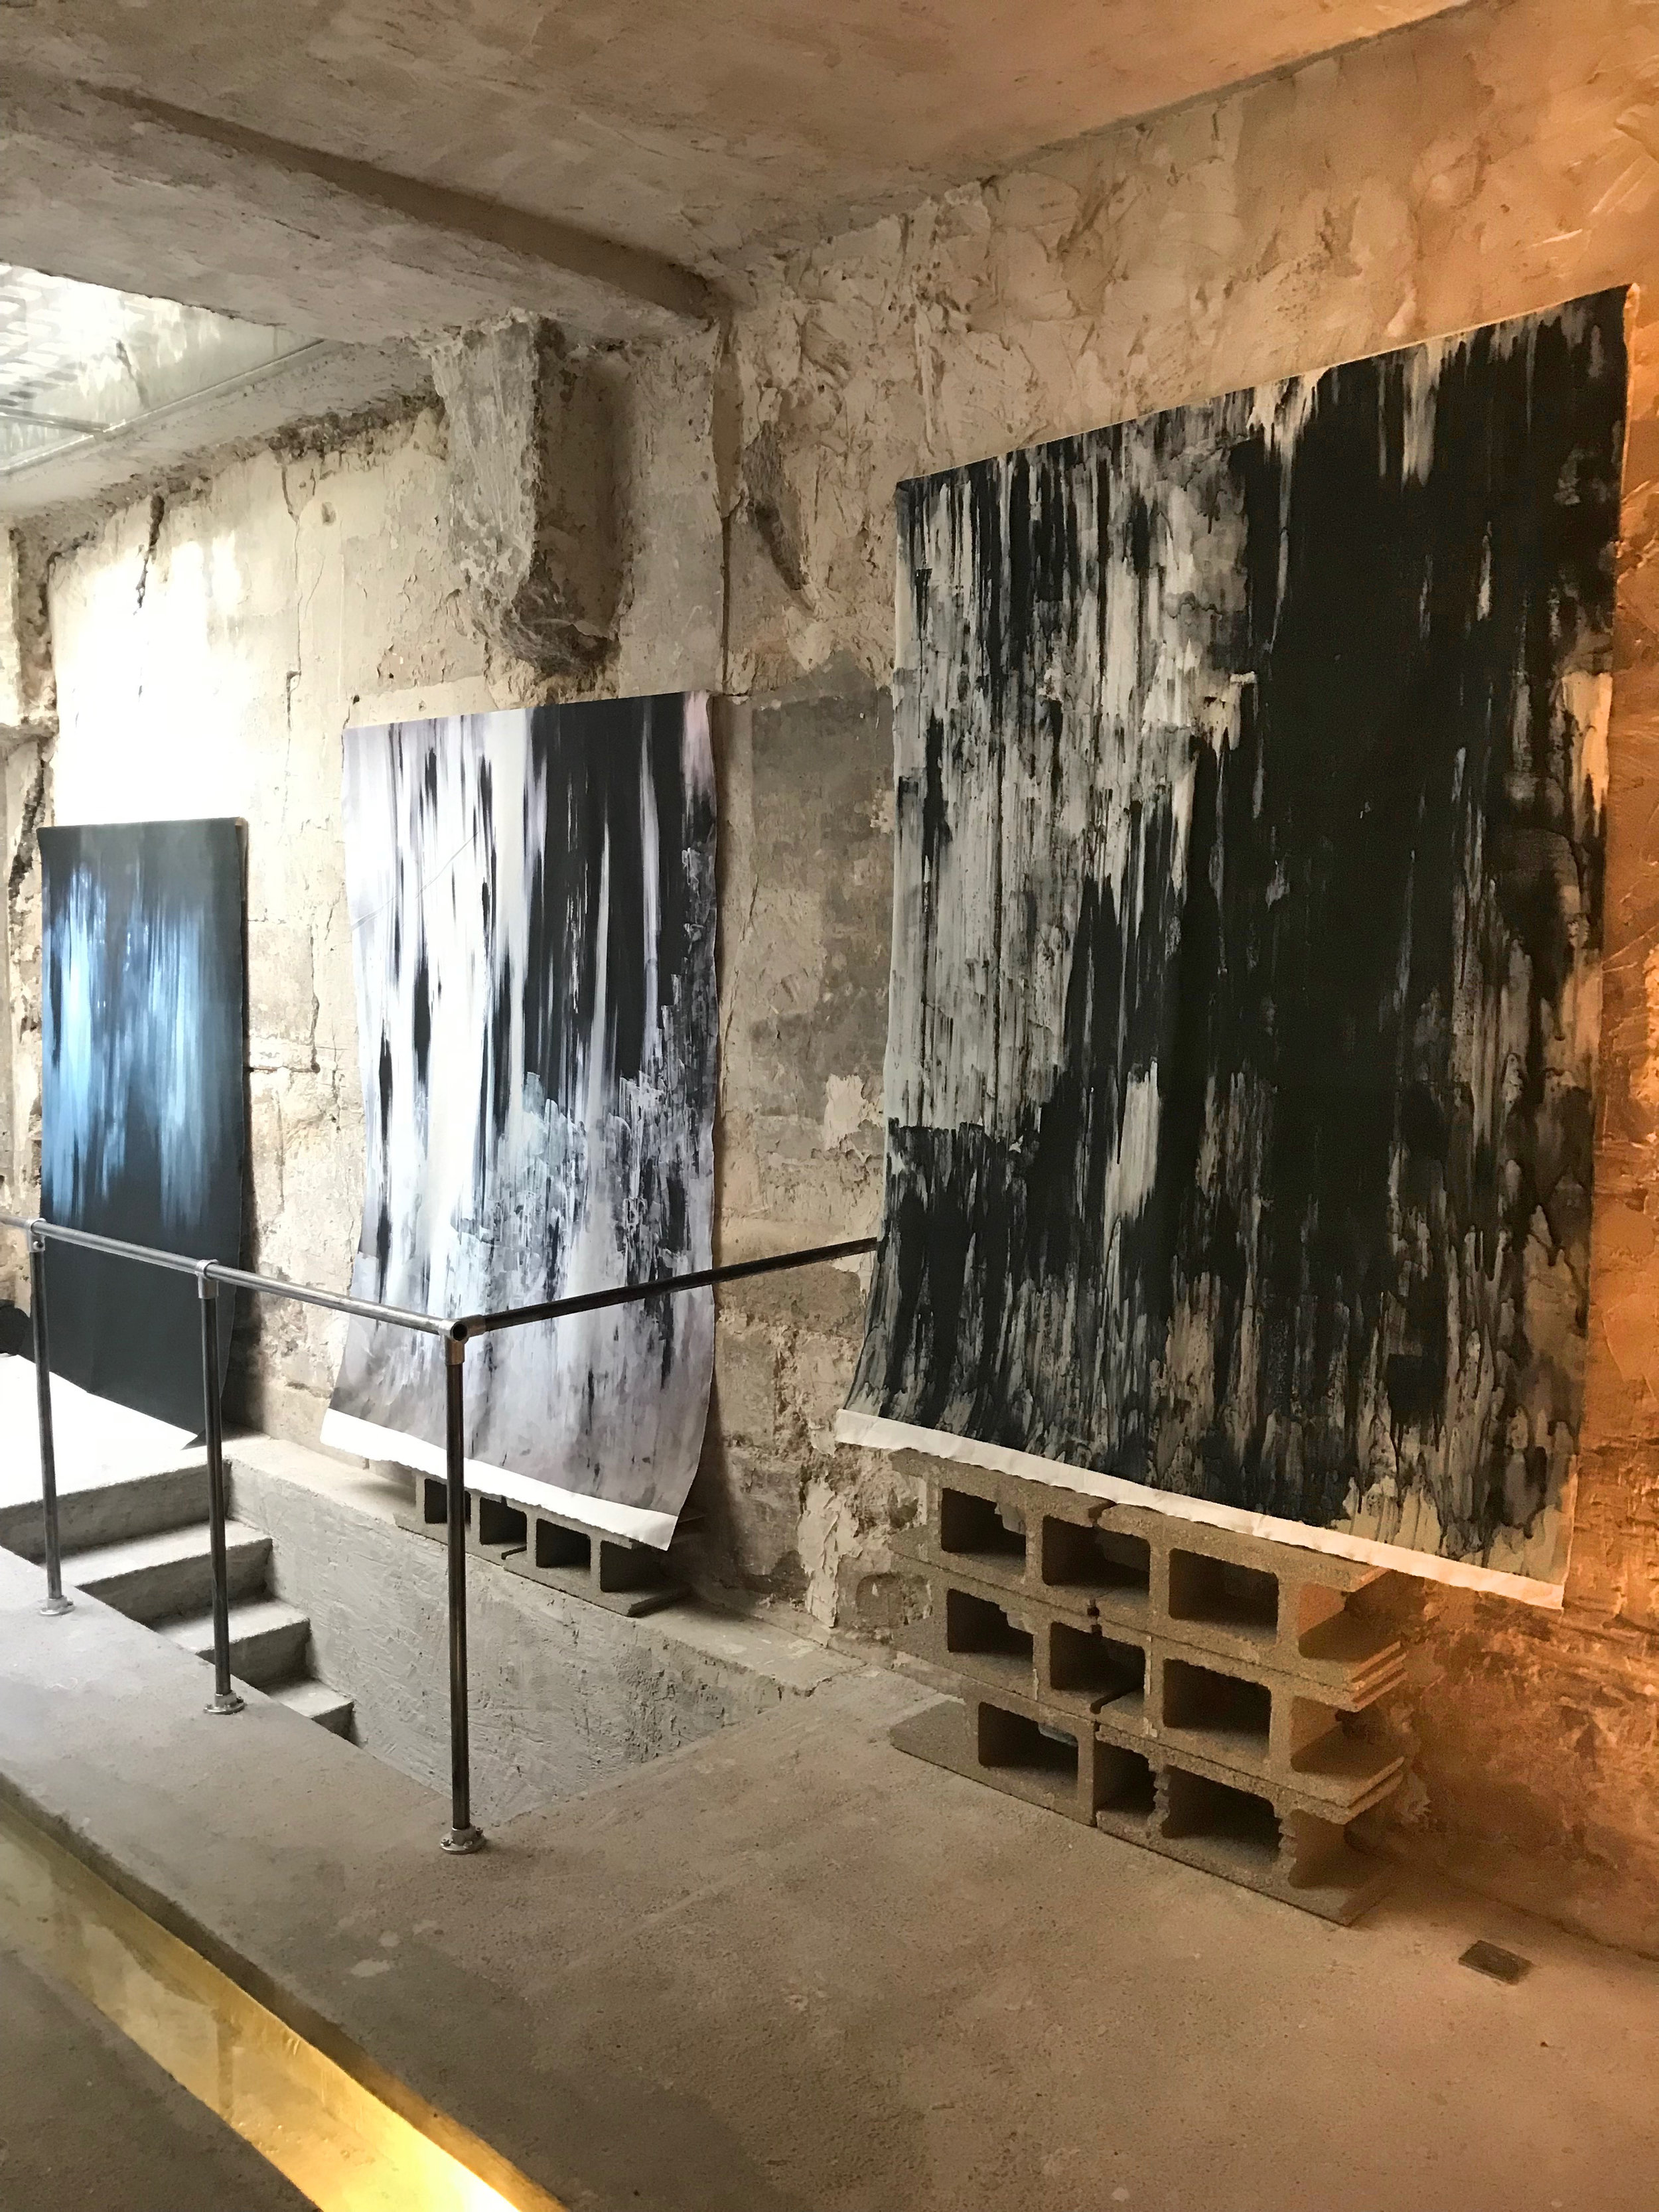  Paintings digitally printed on fabric  150 cm x 200 cm (each)  LUCID INTERVAL / 94 Rue Quincampoix, Paris, France 